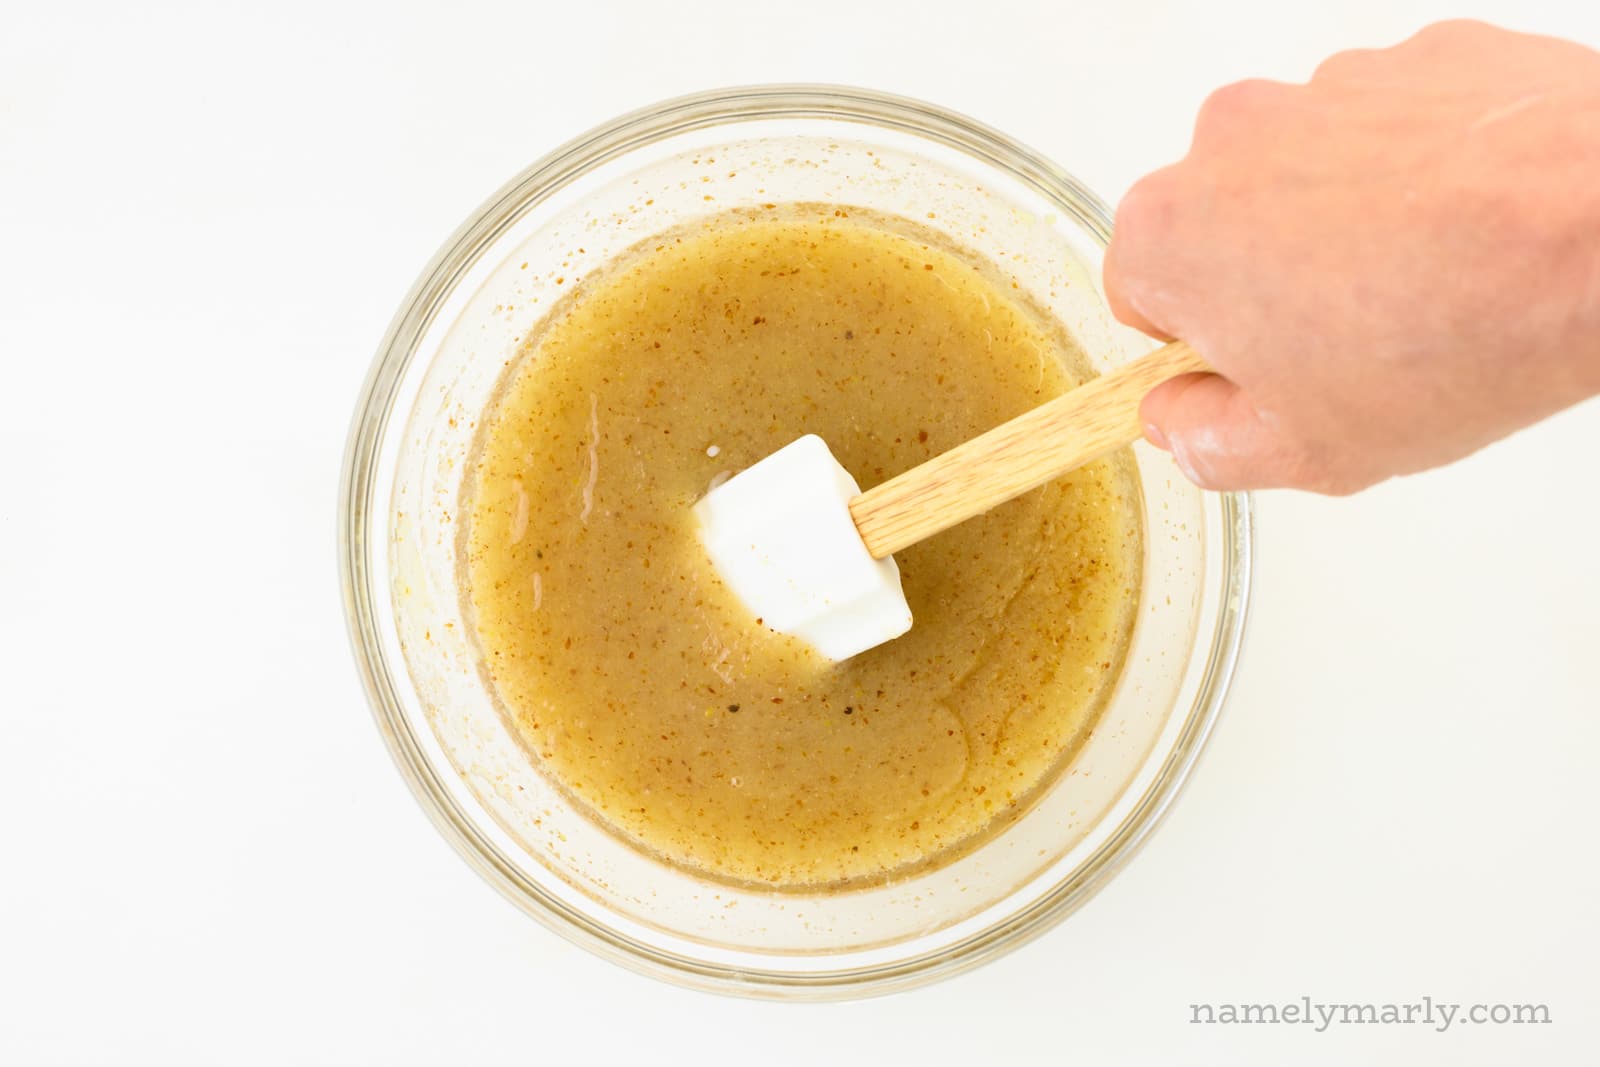 A hand holds a spatula and reaches in to stir golden colored liquid in a bowl.